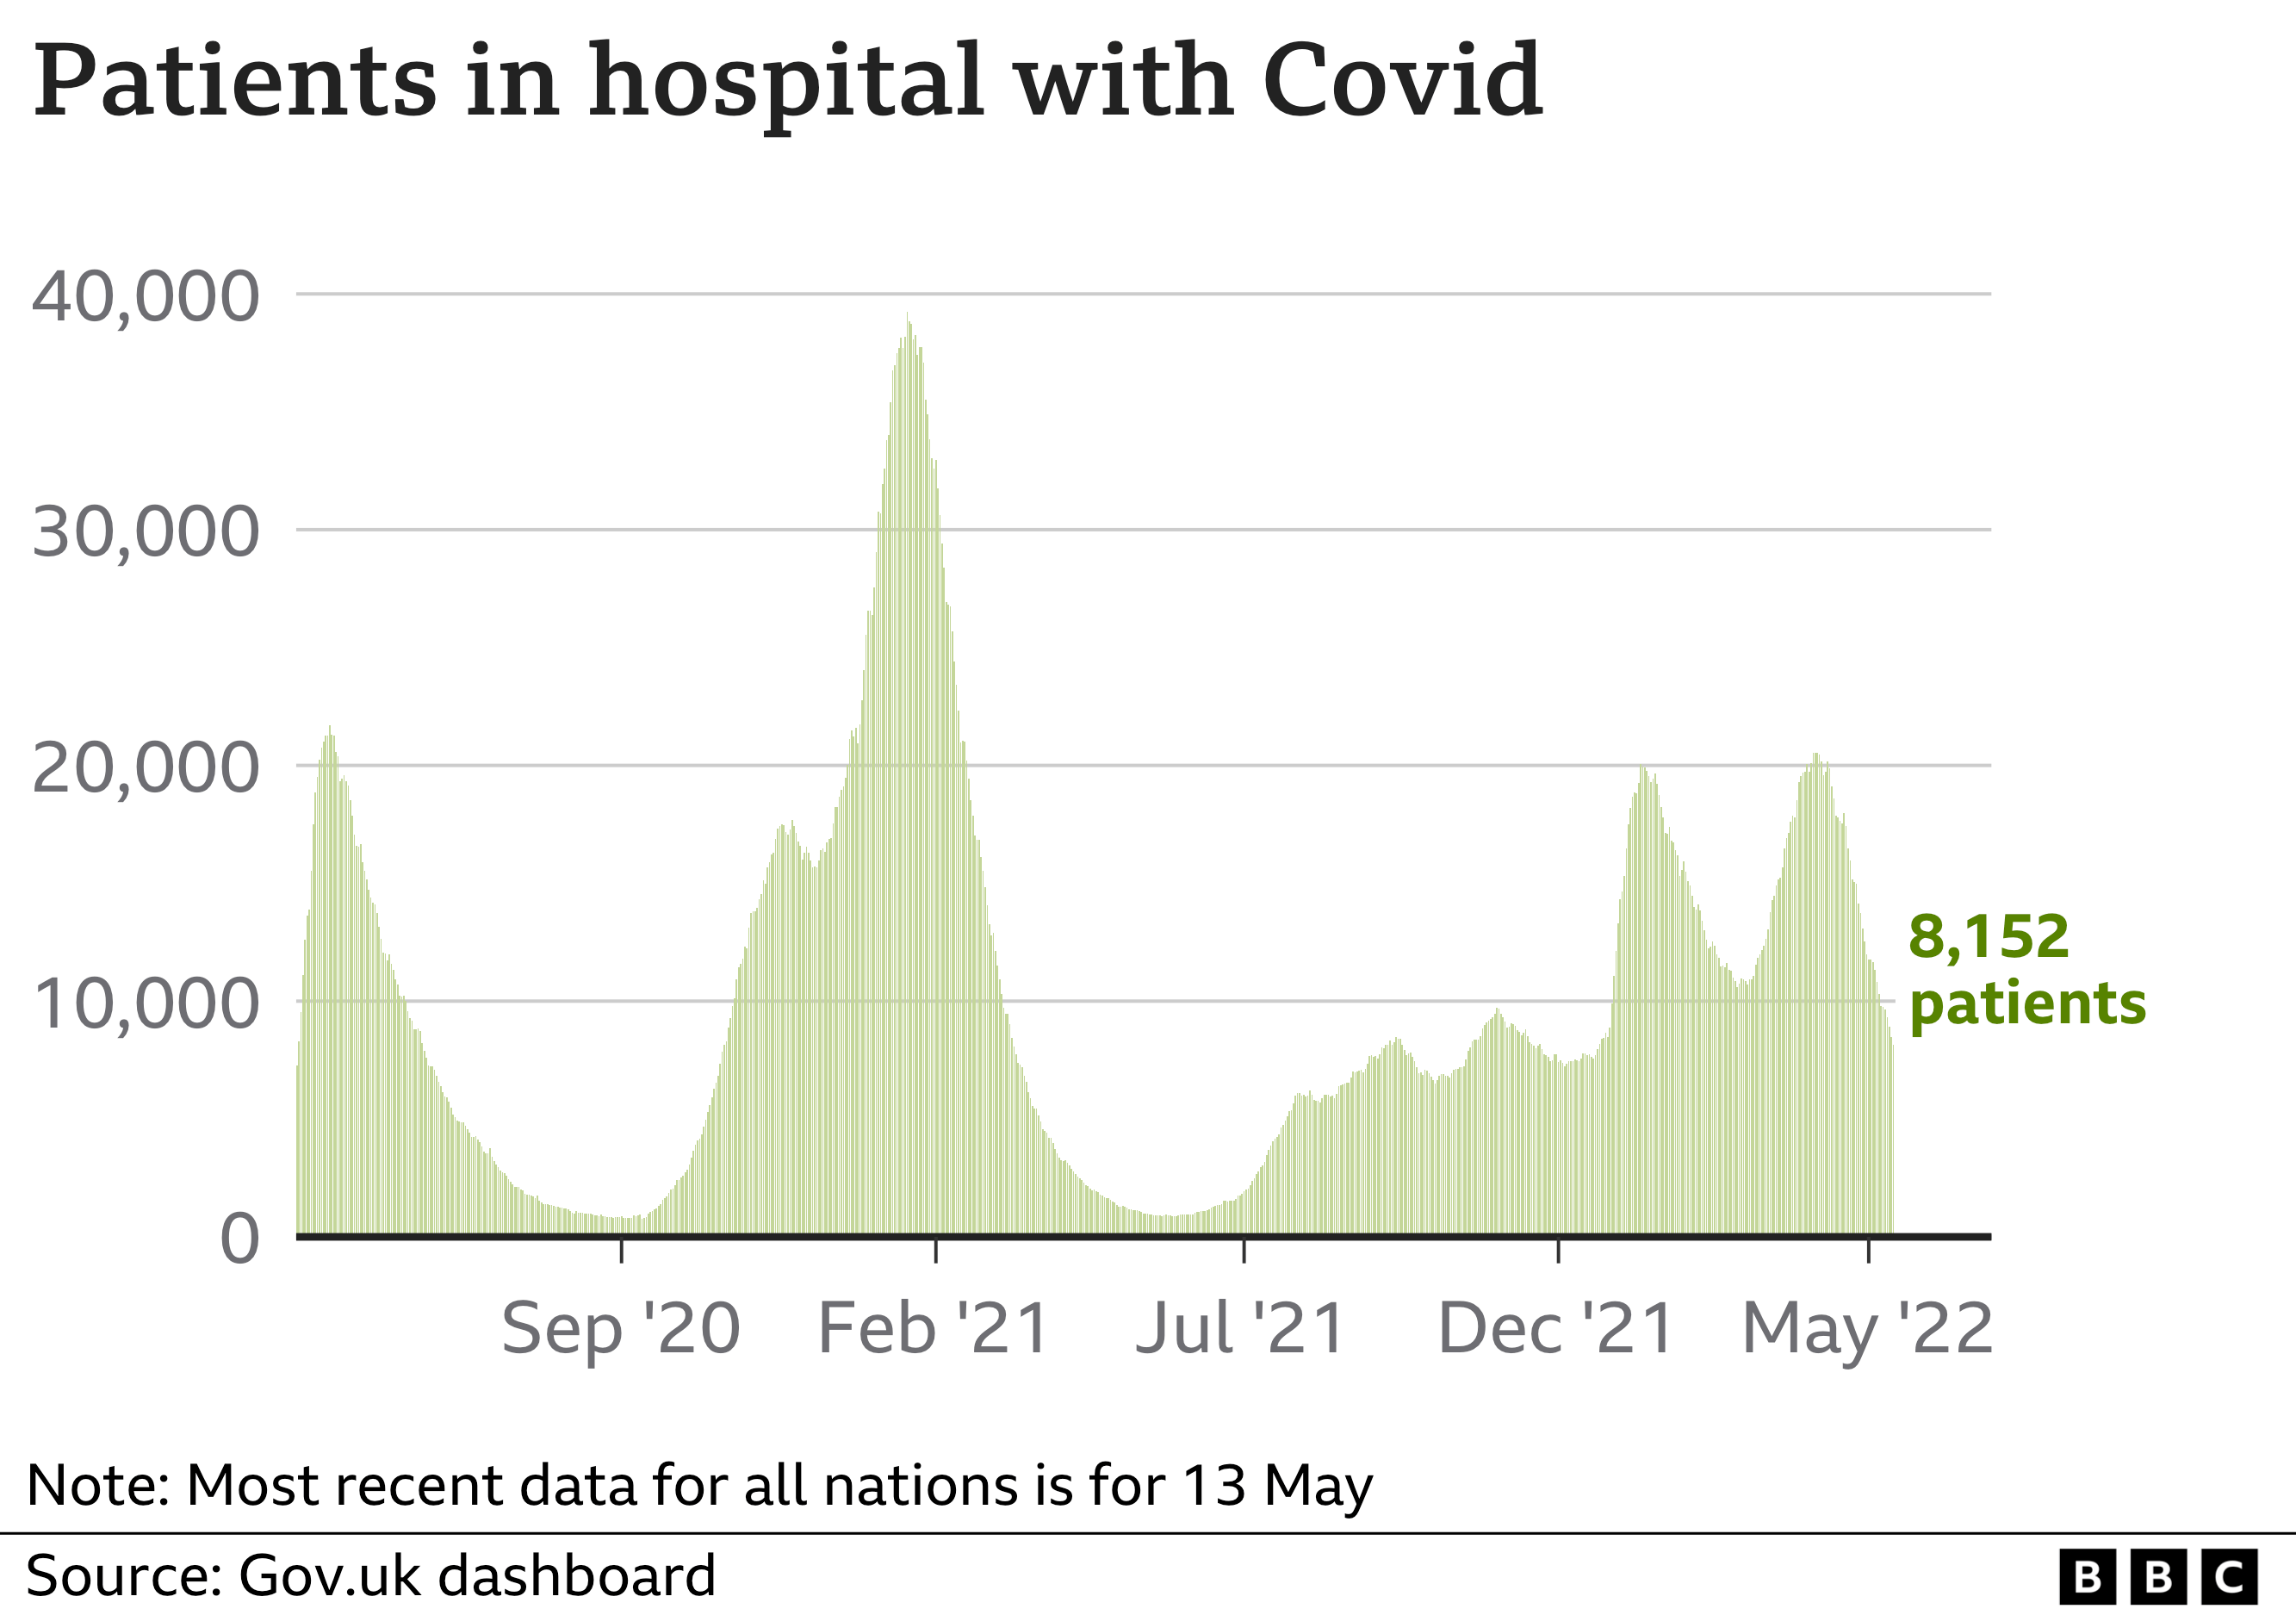 chart showing patients in hospital with Covid